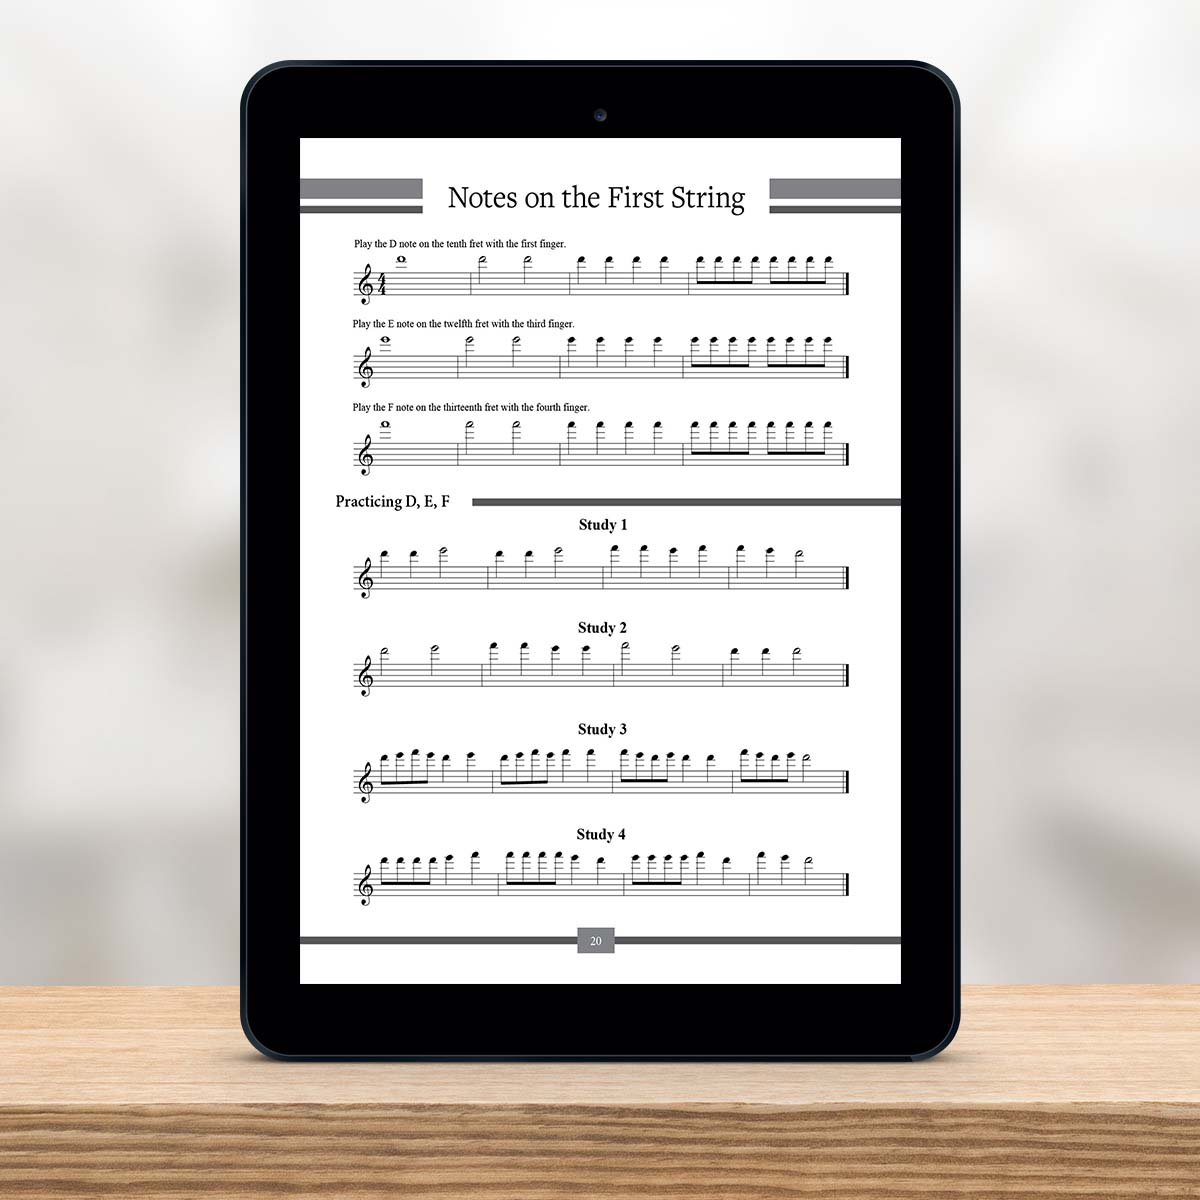 Digital Tablet showing a page from The Missing Method for Guitar Note Reading Series Book 3 by Christian Triola